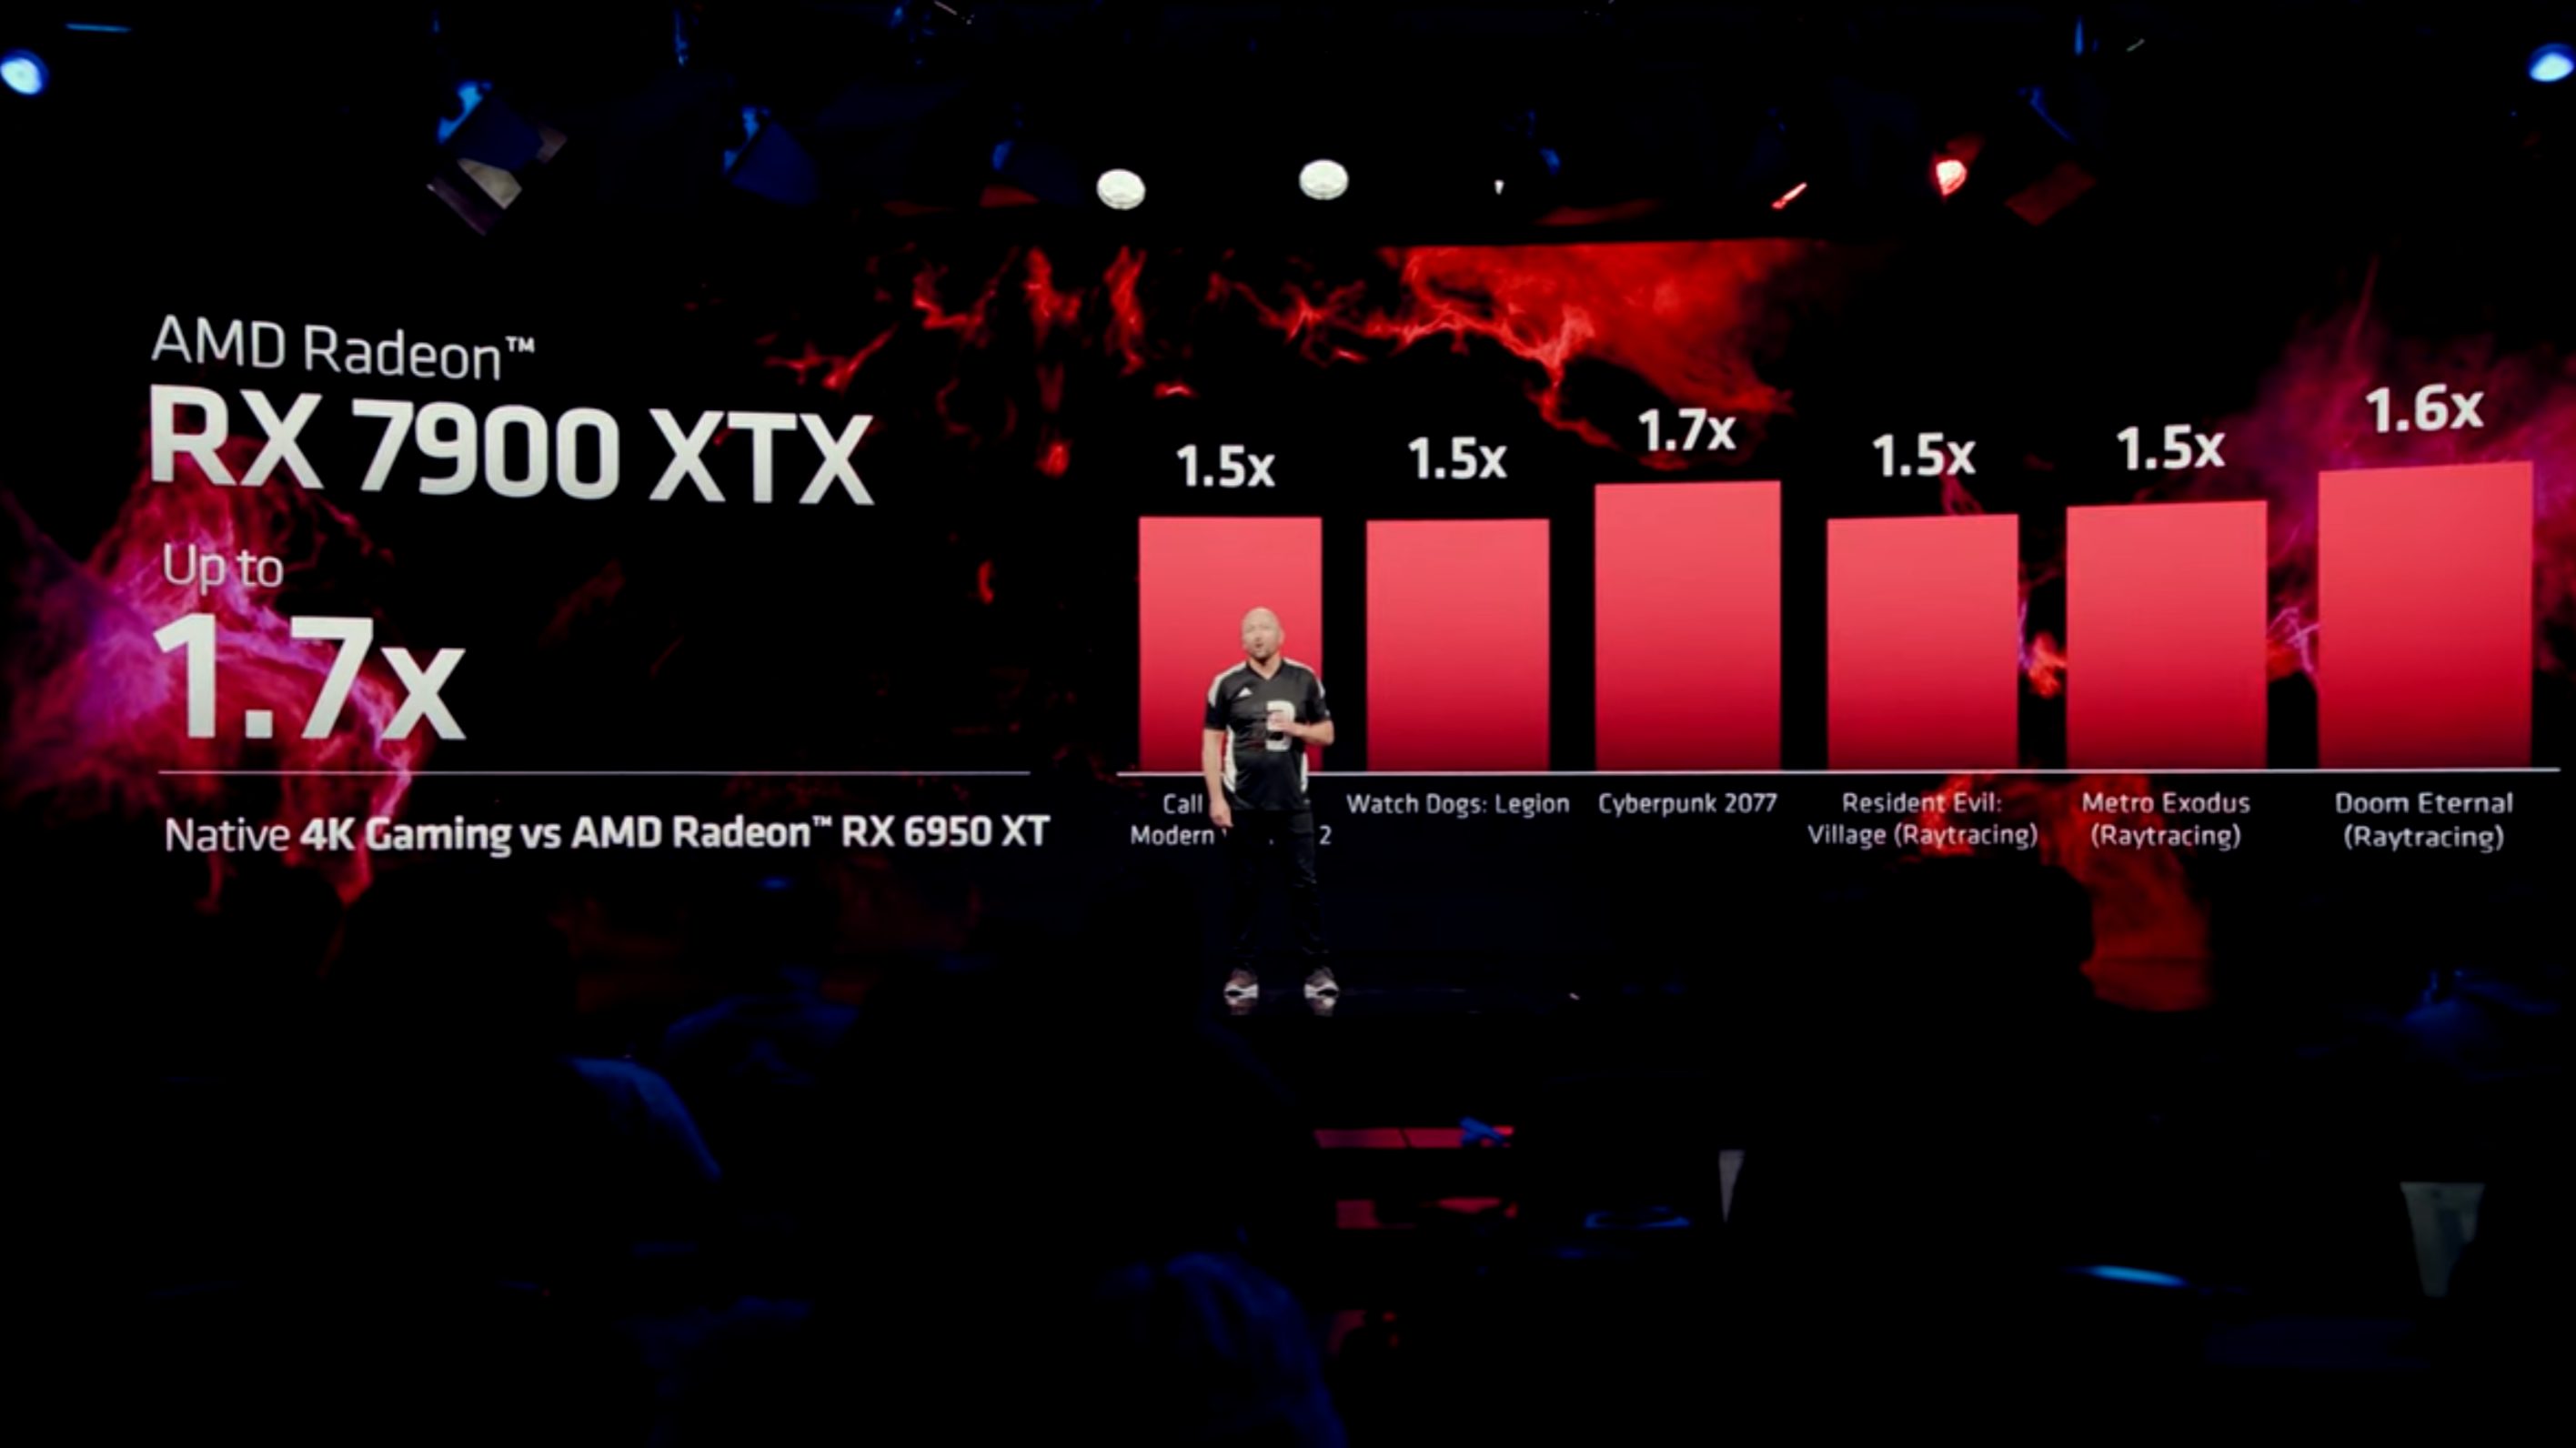 Performance graphs for the AMD Radeon RX 7900 XTX shown on-stage at its reveal event.